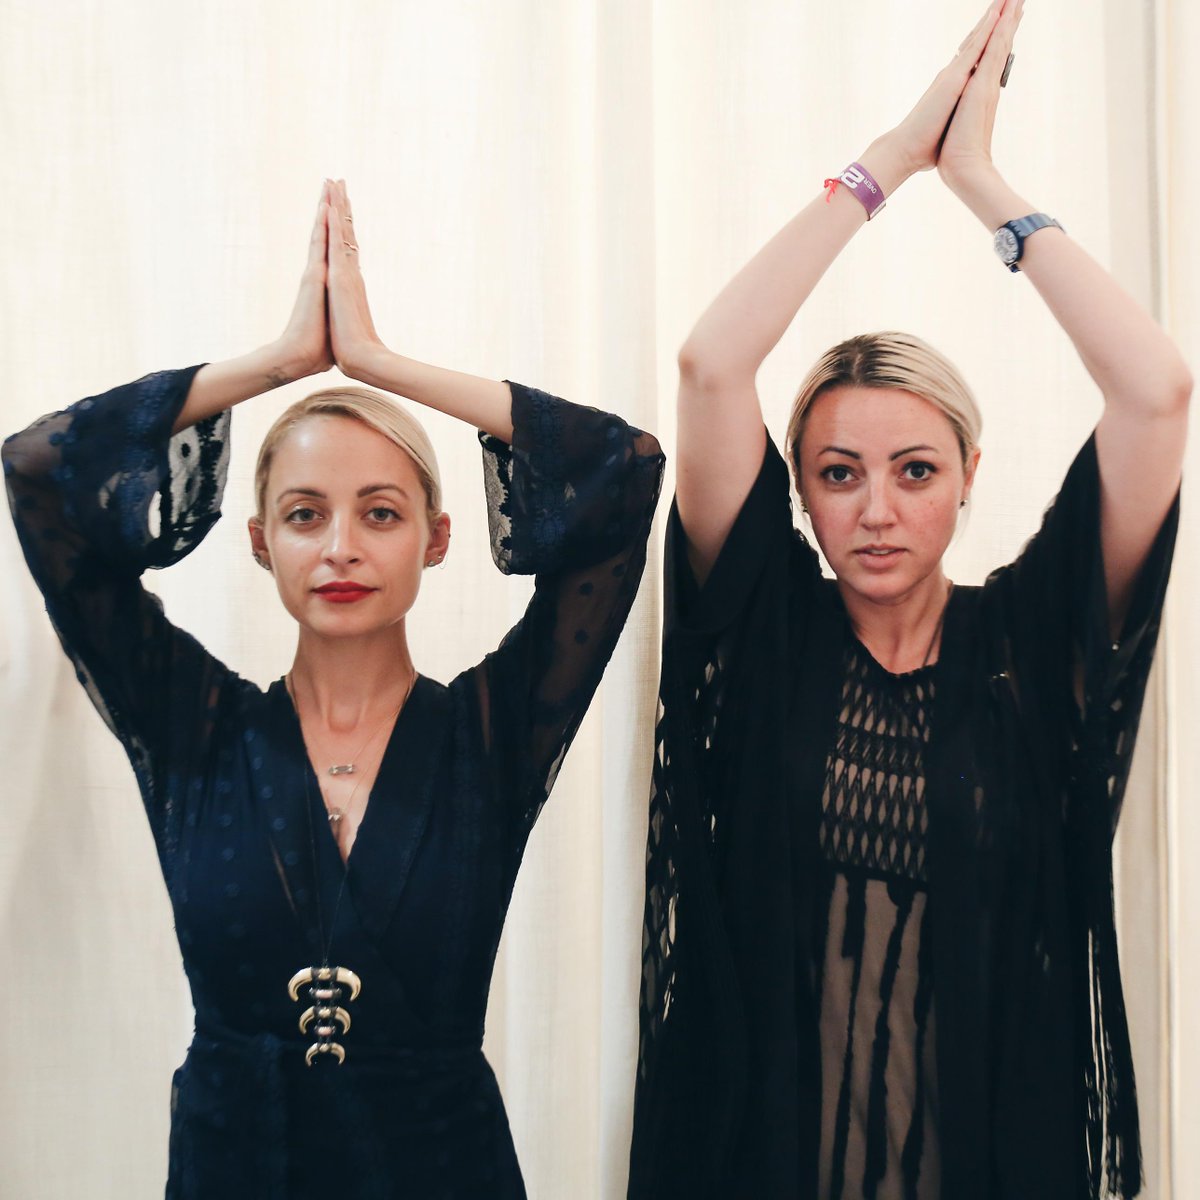 RT @hoh1960: ALSO @nicolerichie & @sofifii looked AMAZING in #HOH1960 head-to-toe! Click for deets to shop: http://t.co/4qNfhxL3Ew http://t…